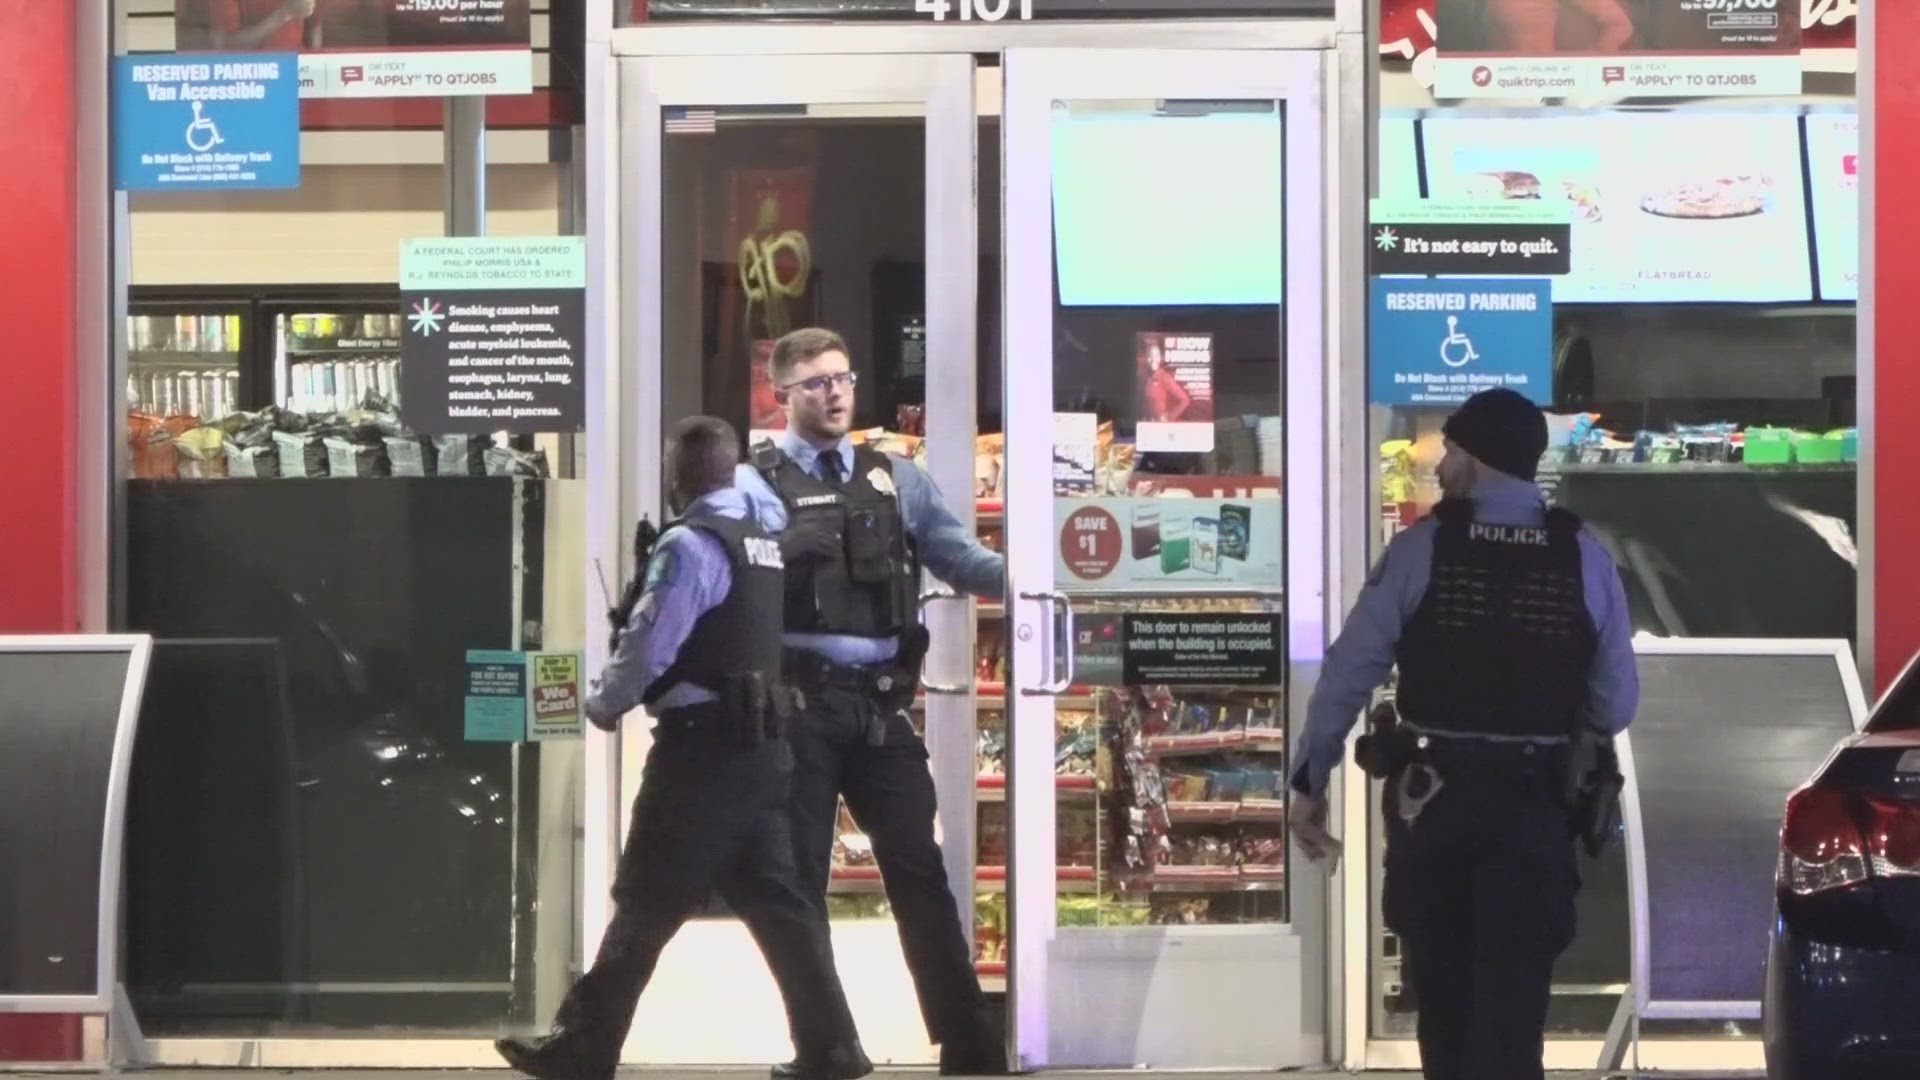 The suspect was shot in the head, and the security guard was shot in the leg during a struggle for his gun, police said. QuikTrip and police are reviewing safety.